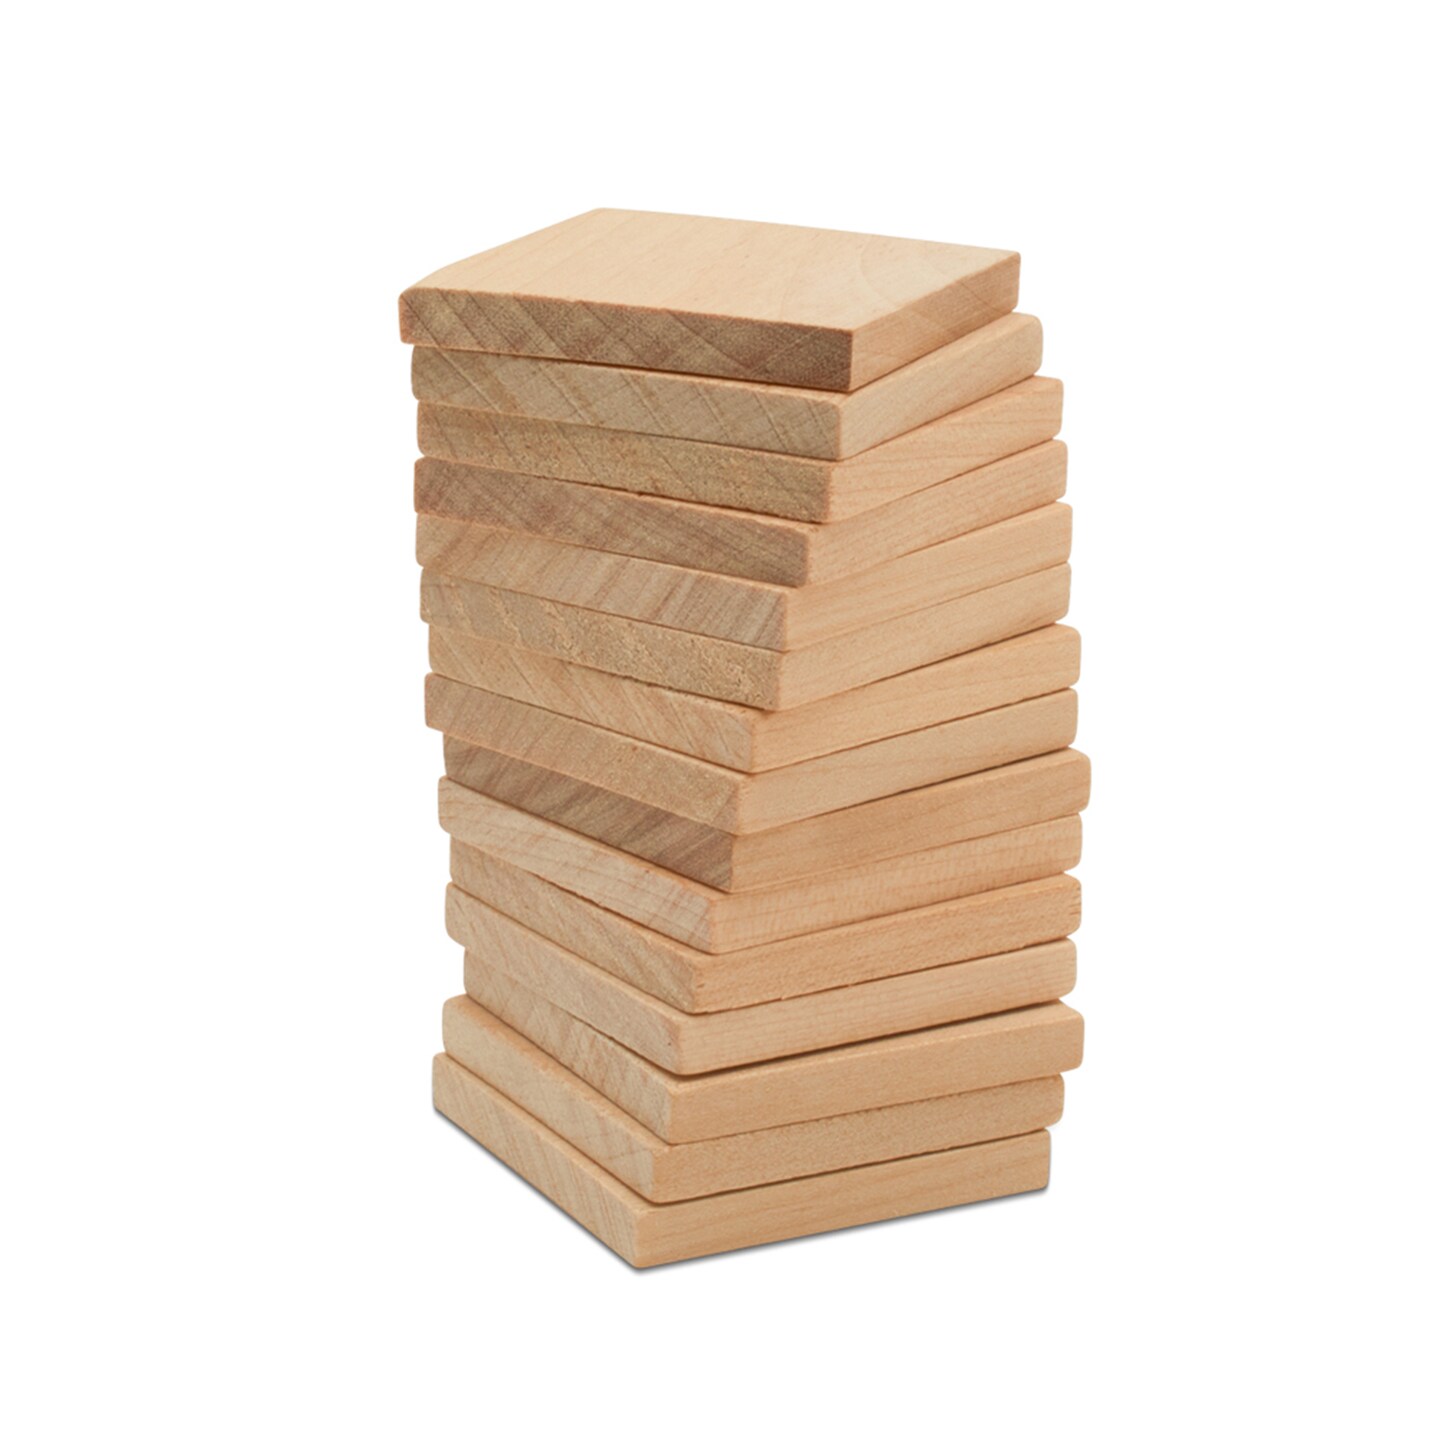 Wood Tiles, Multiple Sizes Available, Blank Wood Squares for Crafts, Woodpeckers